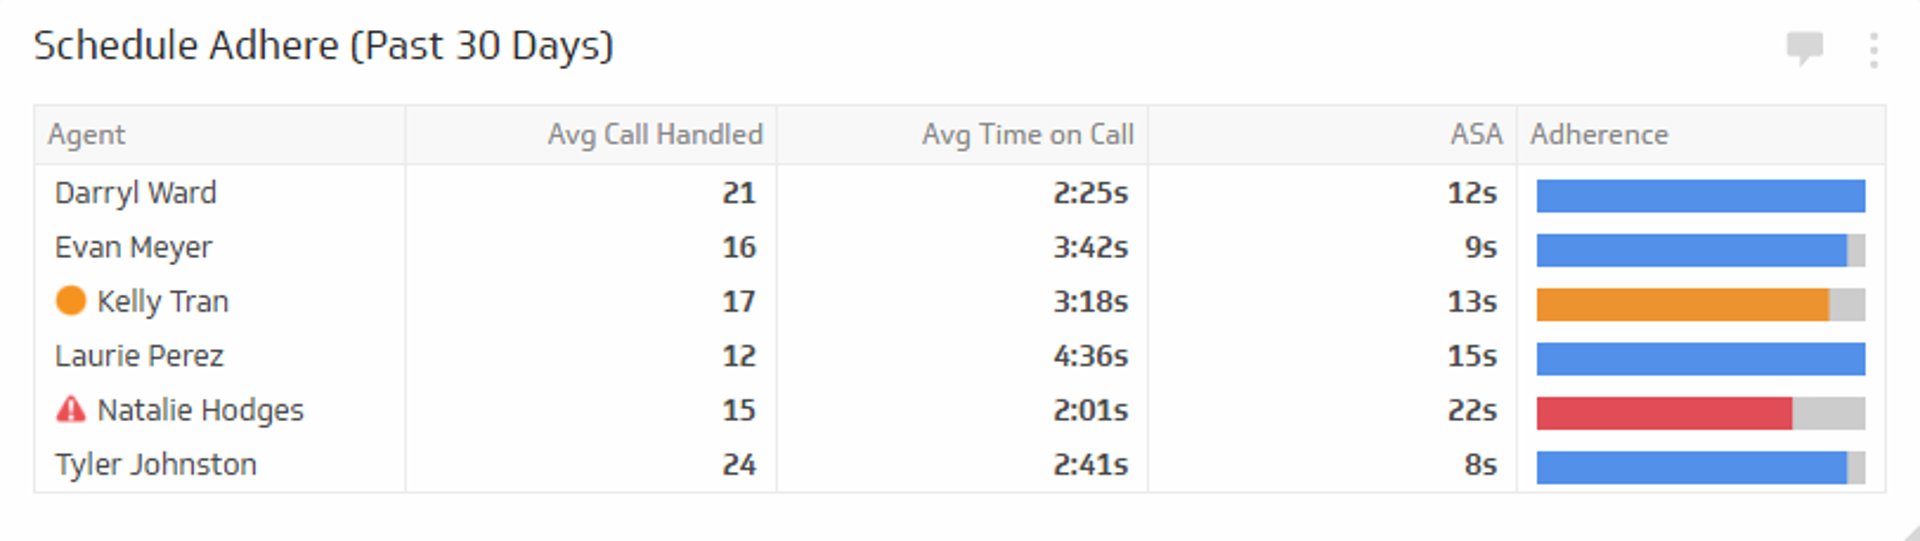 Call Center KPI Examples - Agent Schedule Adherence Metric